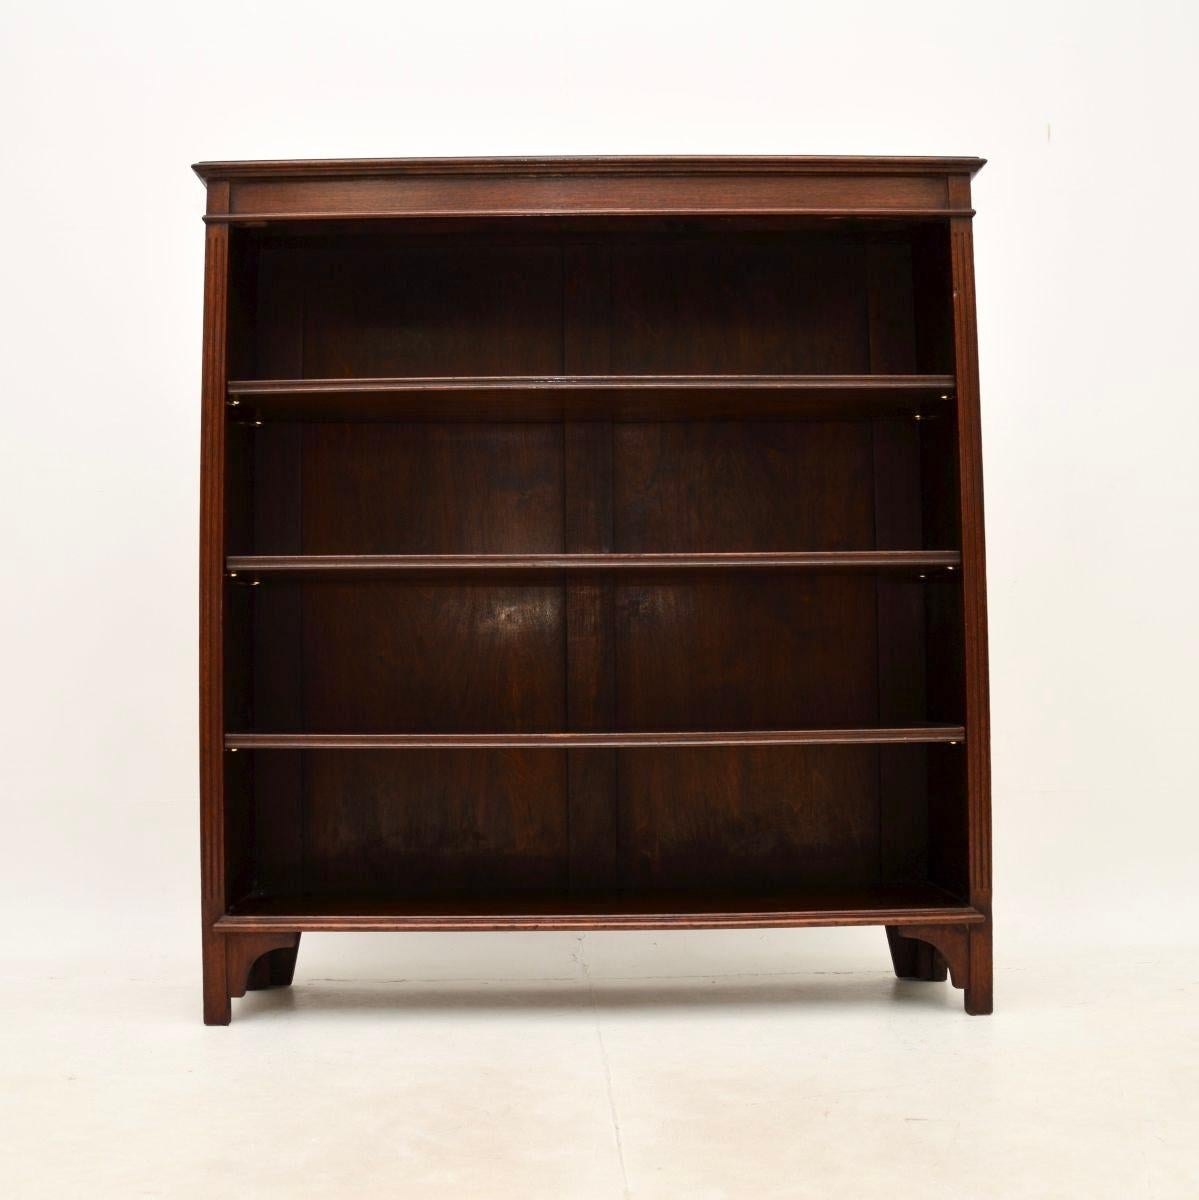 A wonderful antique Victorian open bookcase. This was made in England, it dates from around the 1890-1900 period.

It is of fine quality and is a very useful size with lots of storage space. The shelves are all adjustable and removable, this sits on